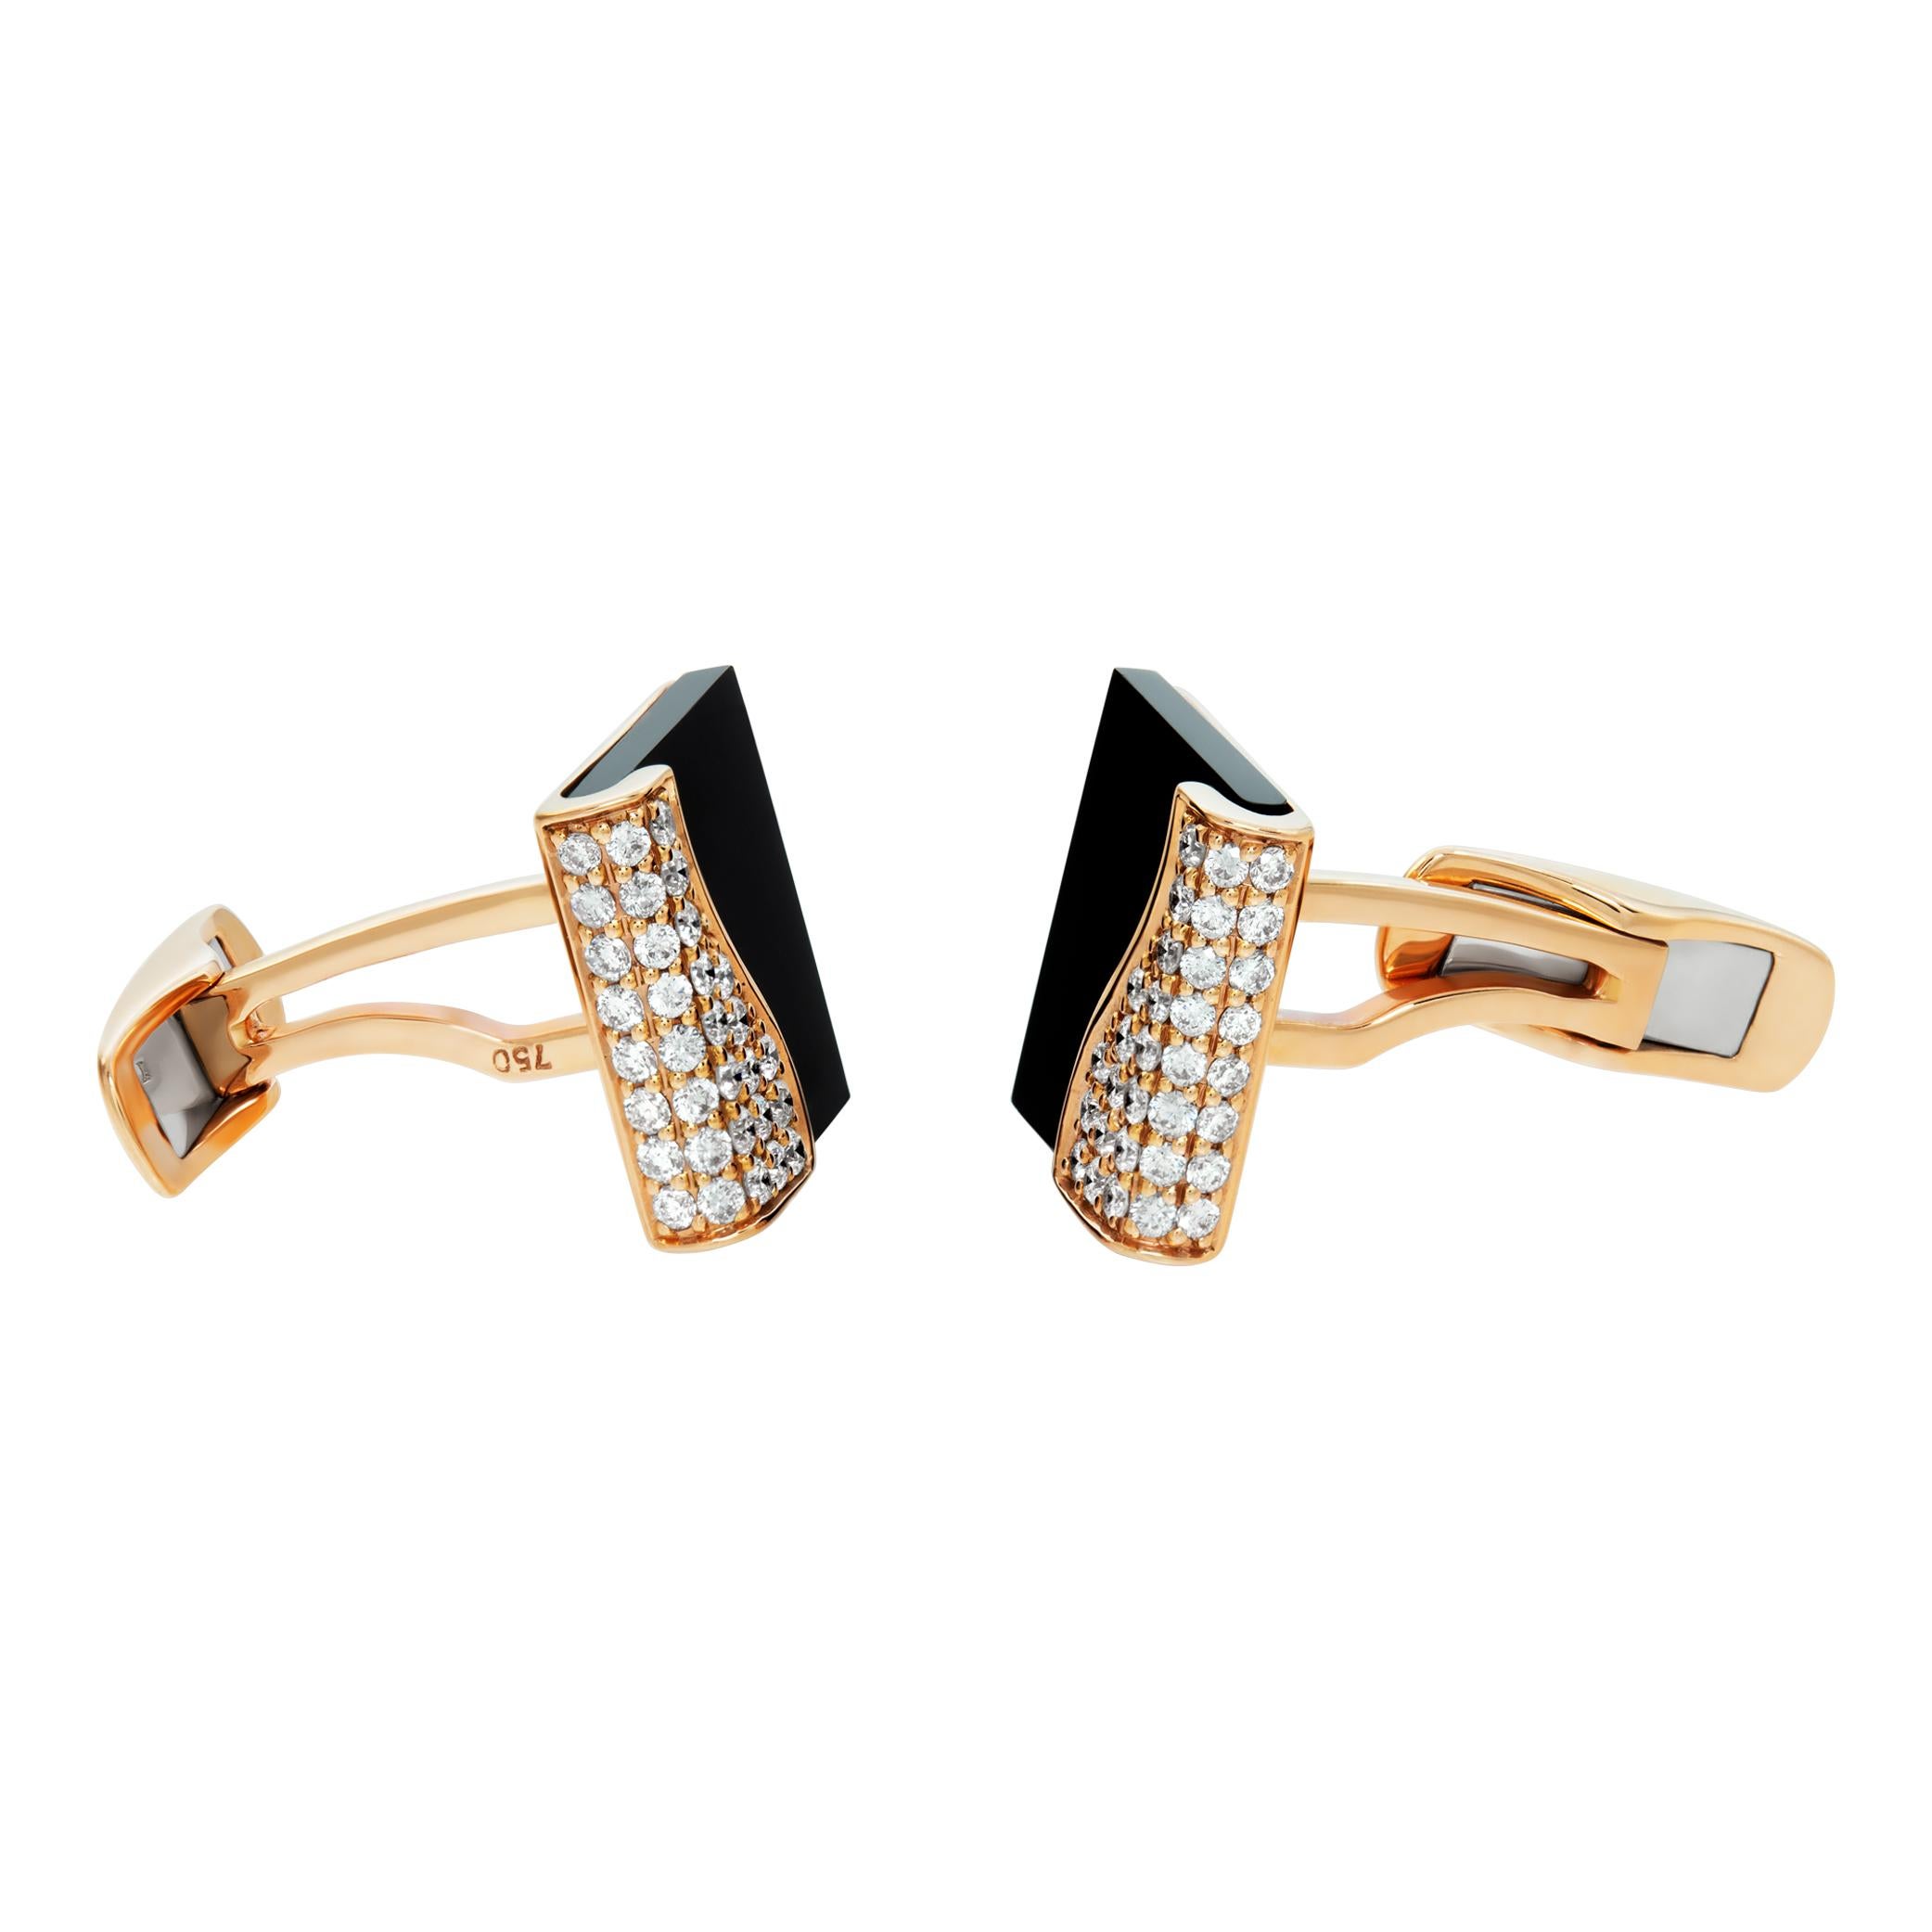 Rose gold onyx square cufflinks with pave diamonds In Excellent Condition For Sale In Surfside, FL